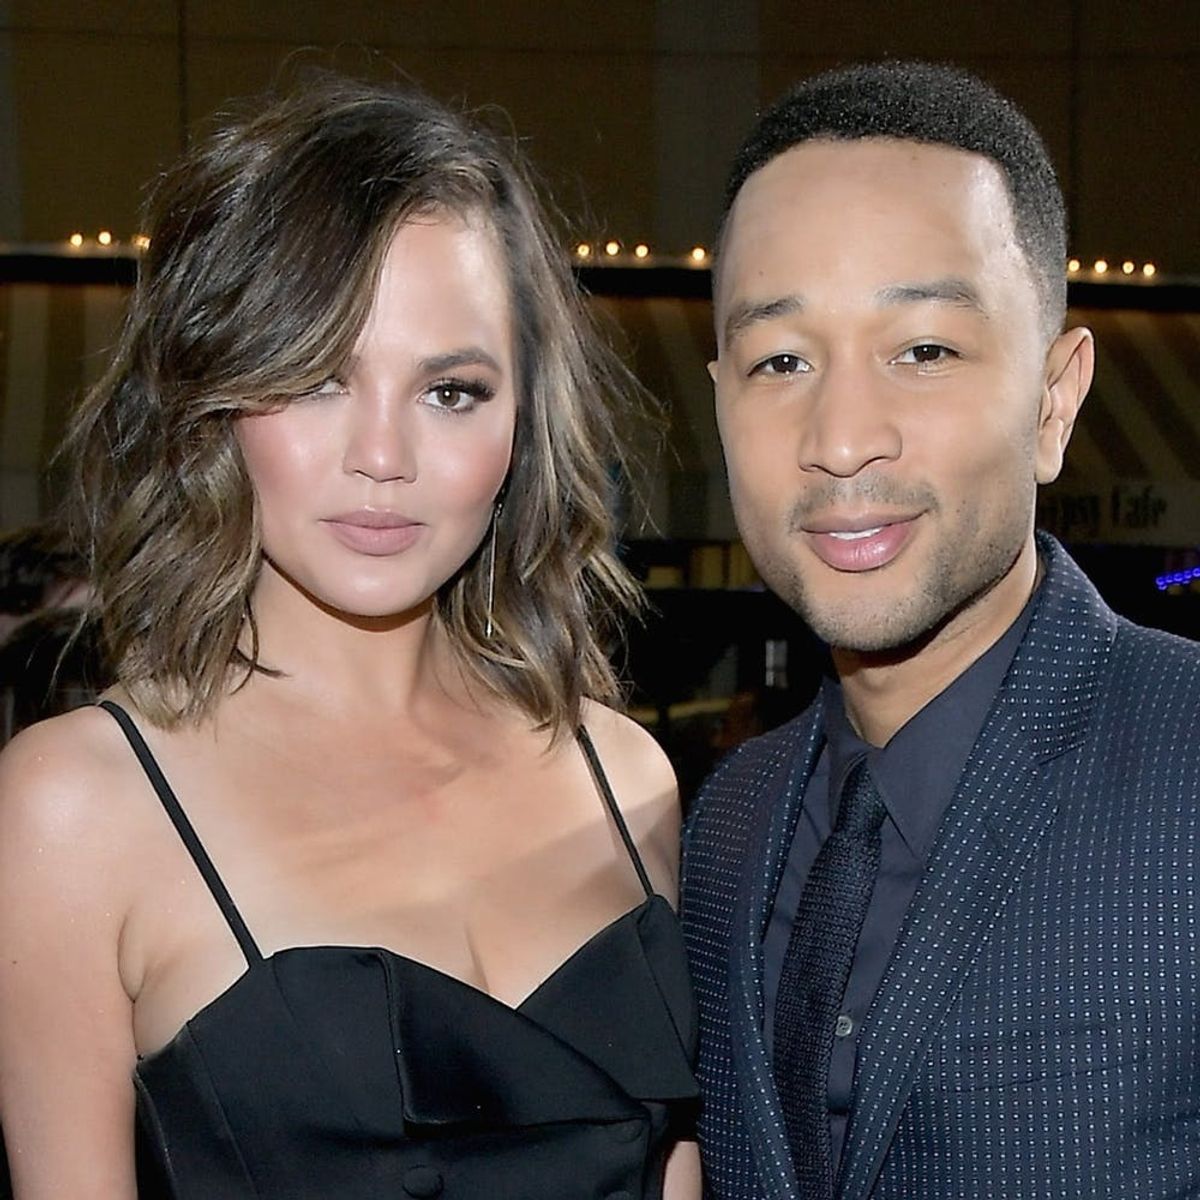 Chrissy Teigen and John Legend Adopted Two Adorable New Puppies and They’ll Melt Your Heart